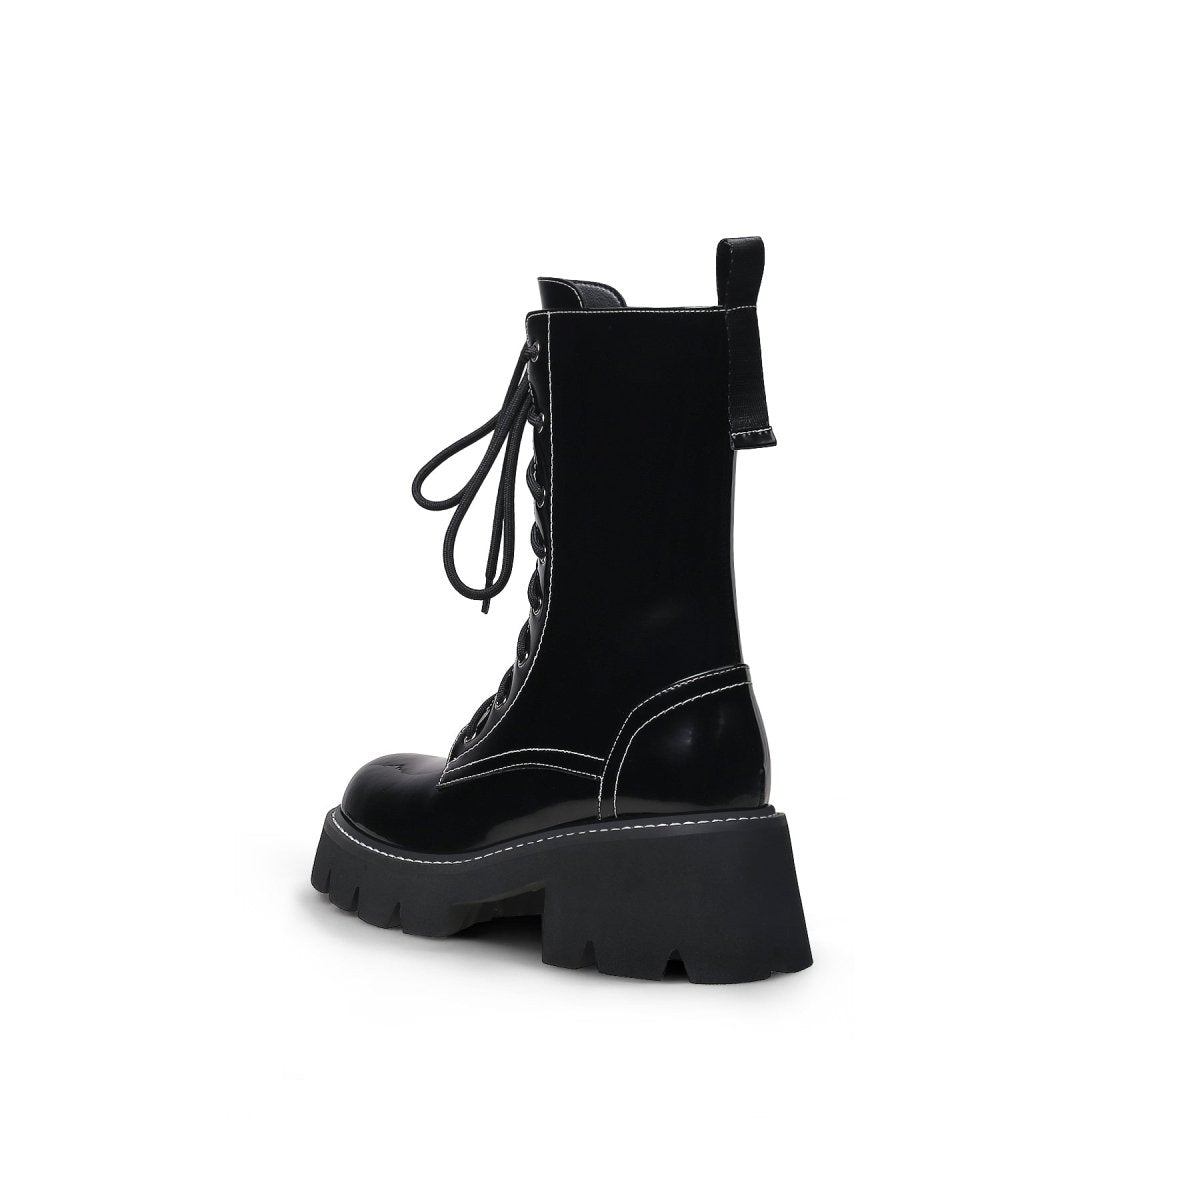 Standing Tall Contrast Stitch Lace-up Black Boots - 0cm